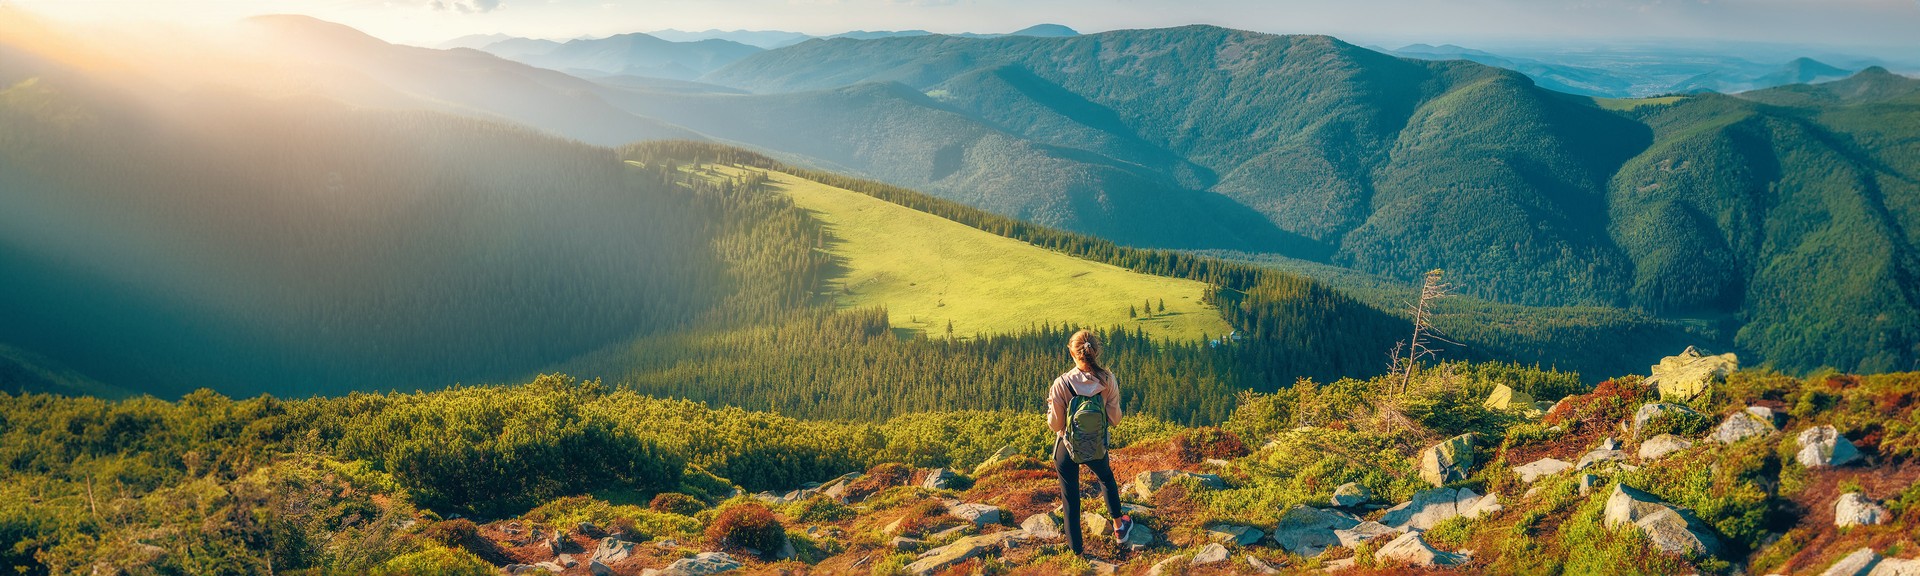 Ukrainian`s Carpathian Mountains and a Standing Woman With a Backpack on the Stones